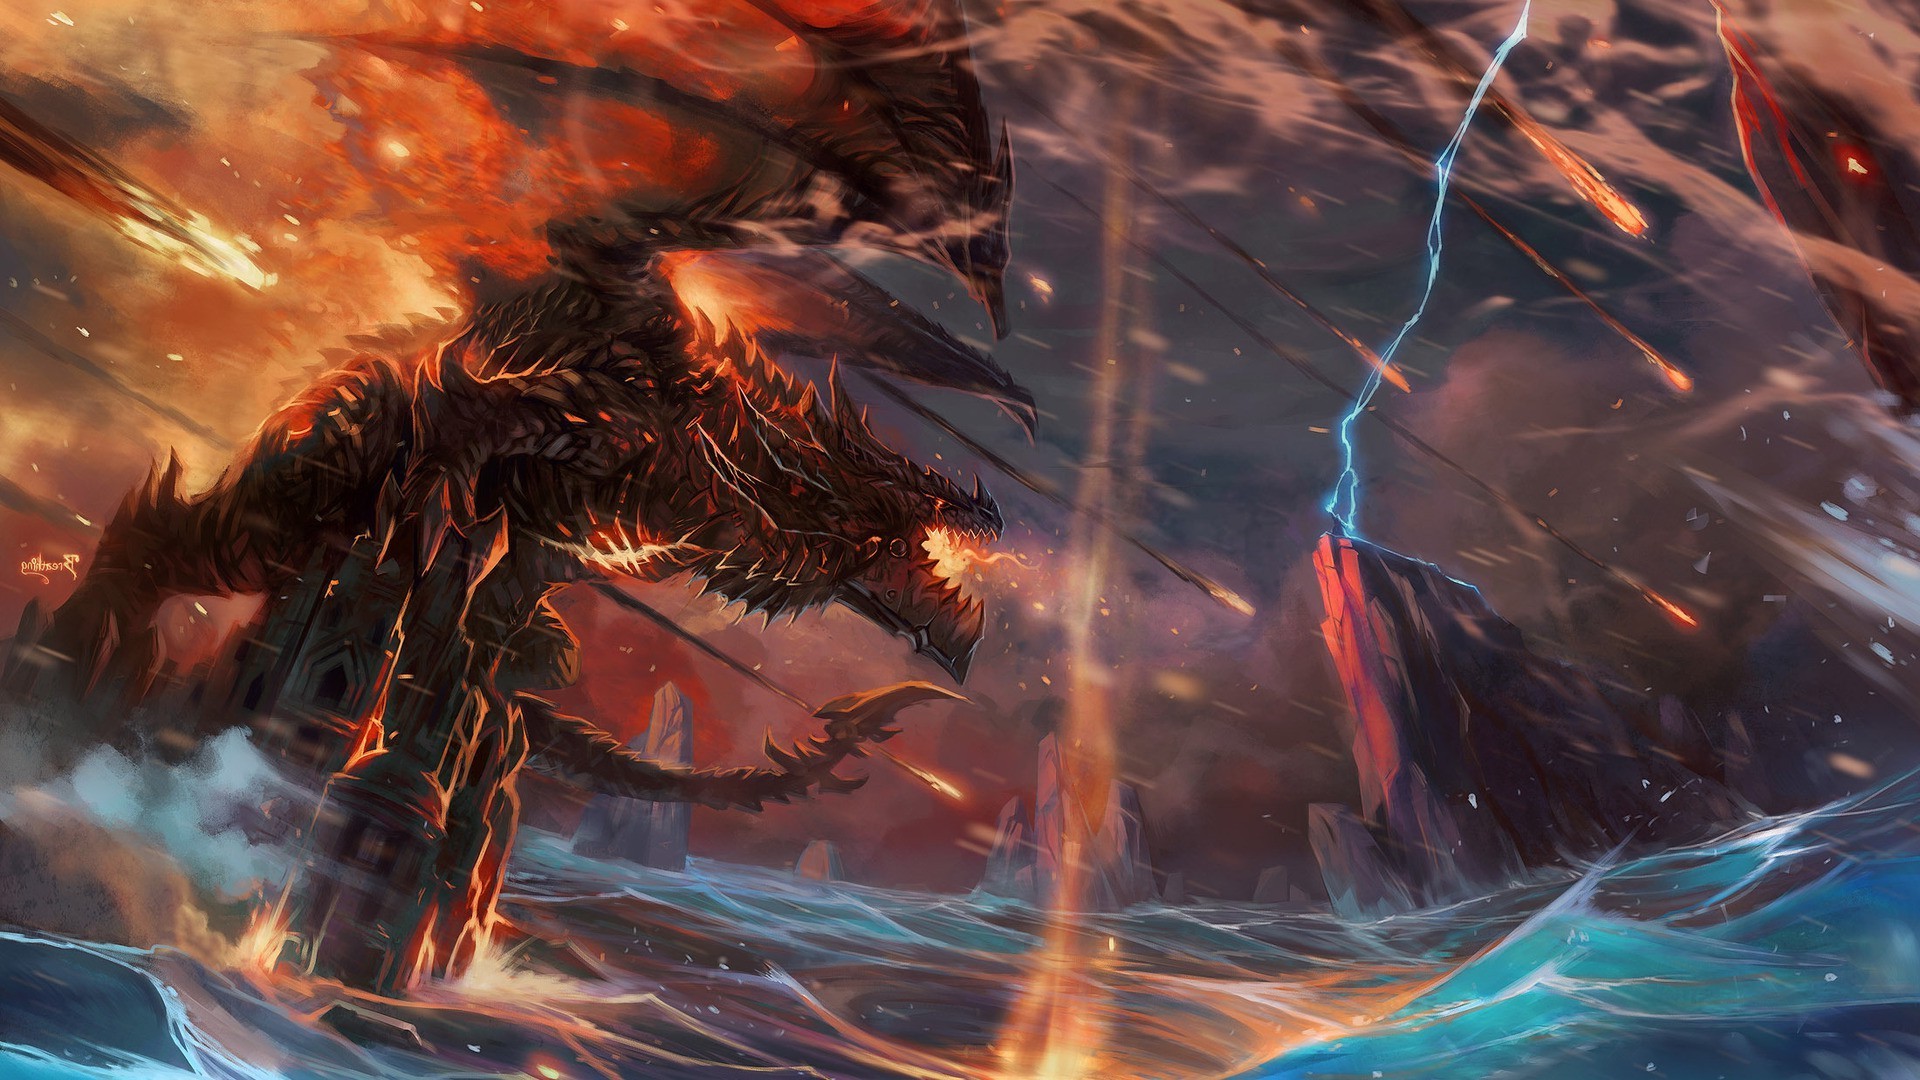 Dragon World Of Warcraft Cataclysm Deathwing Thrall Wallpapers Images, Photos, Reviews